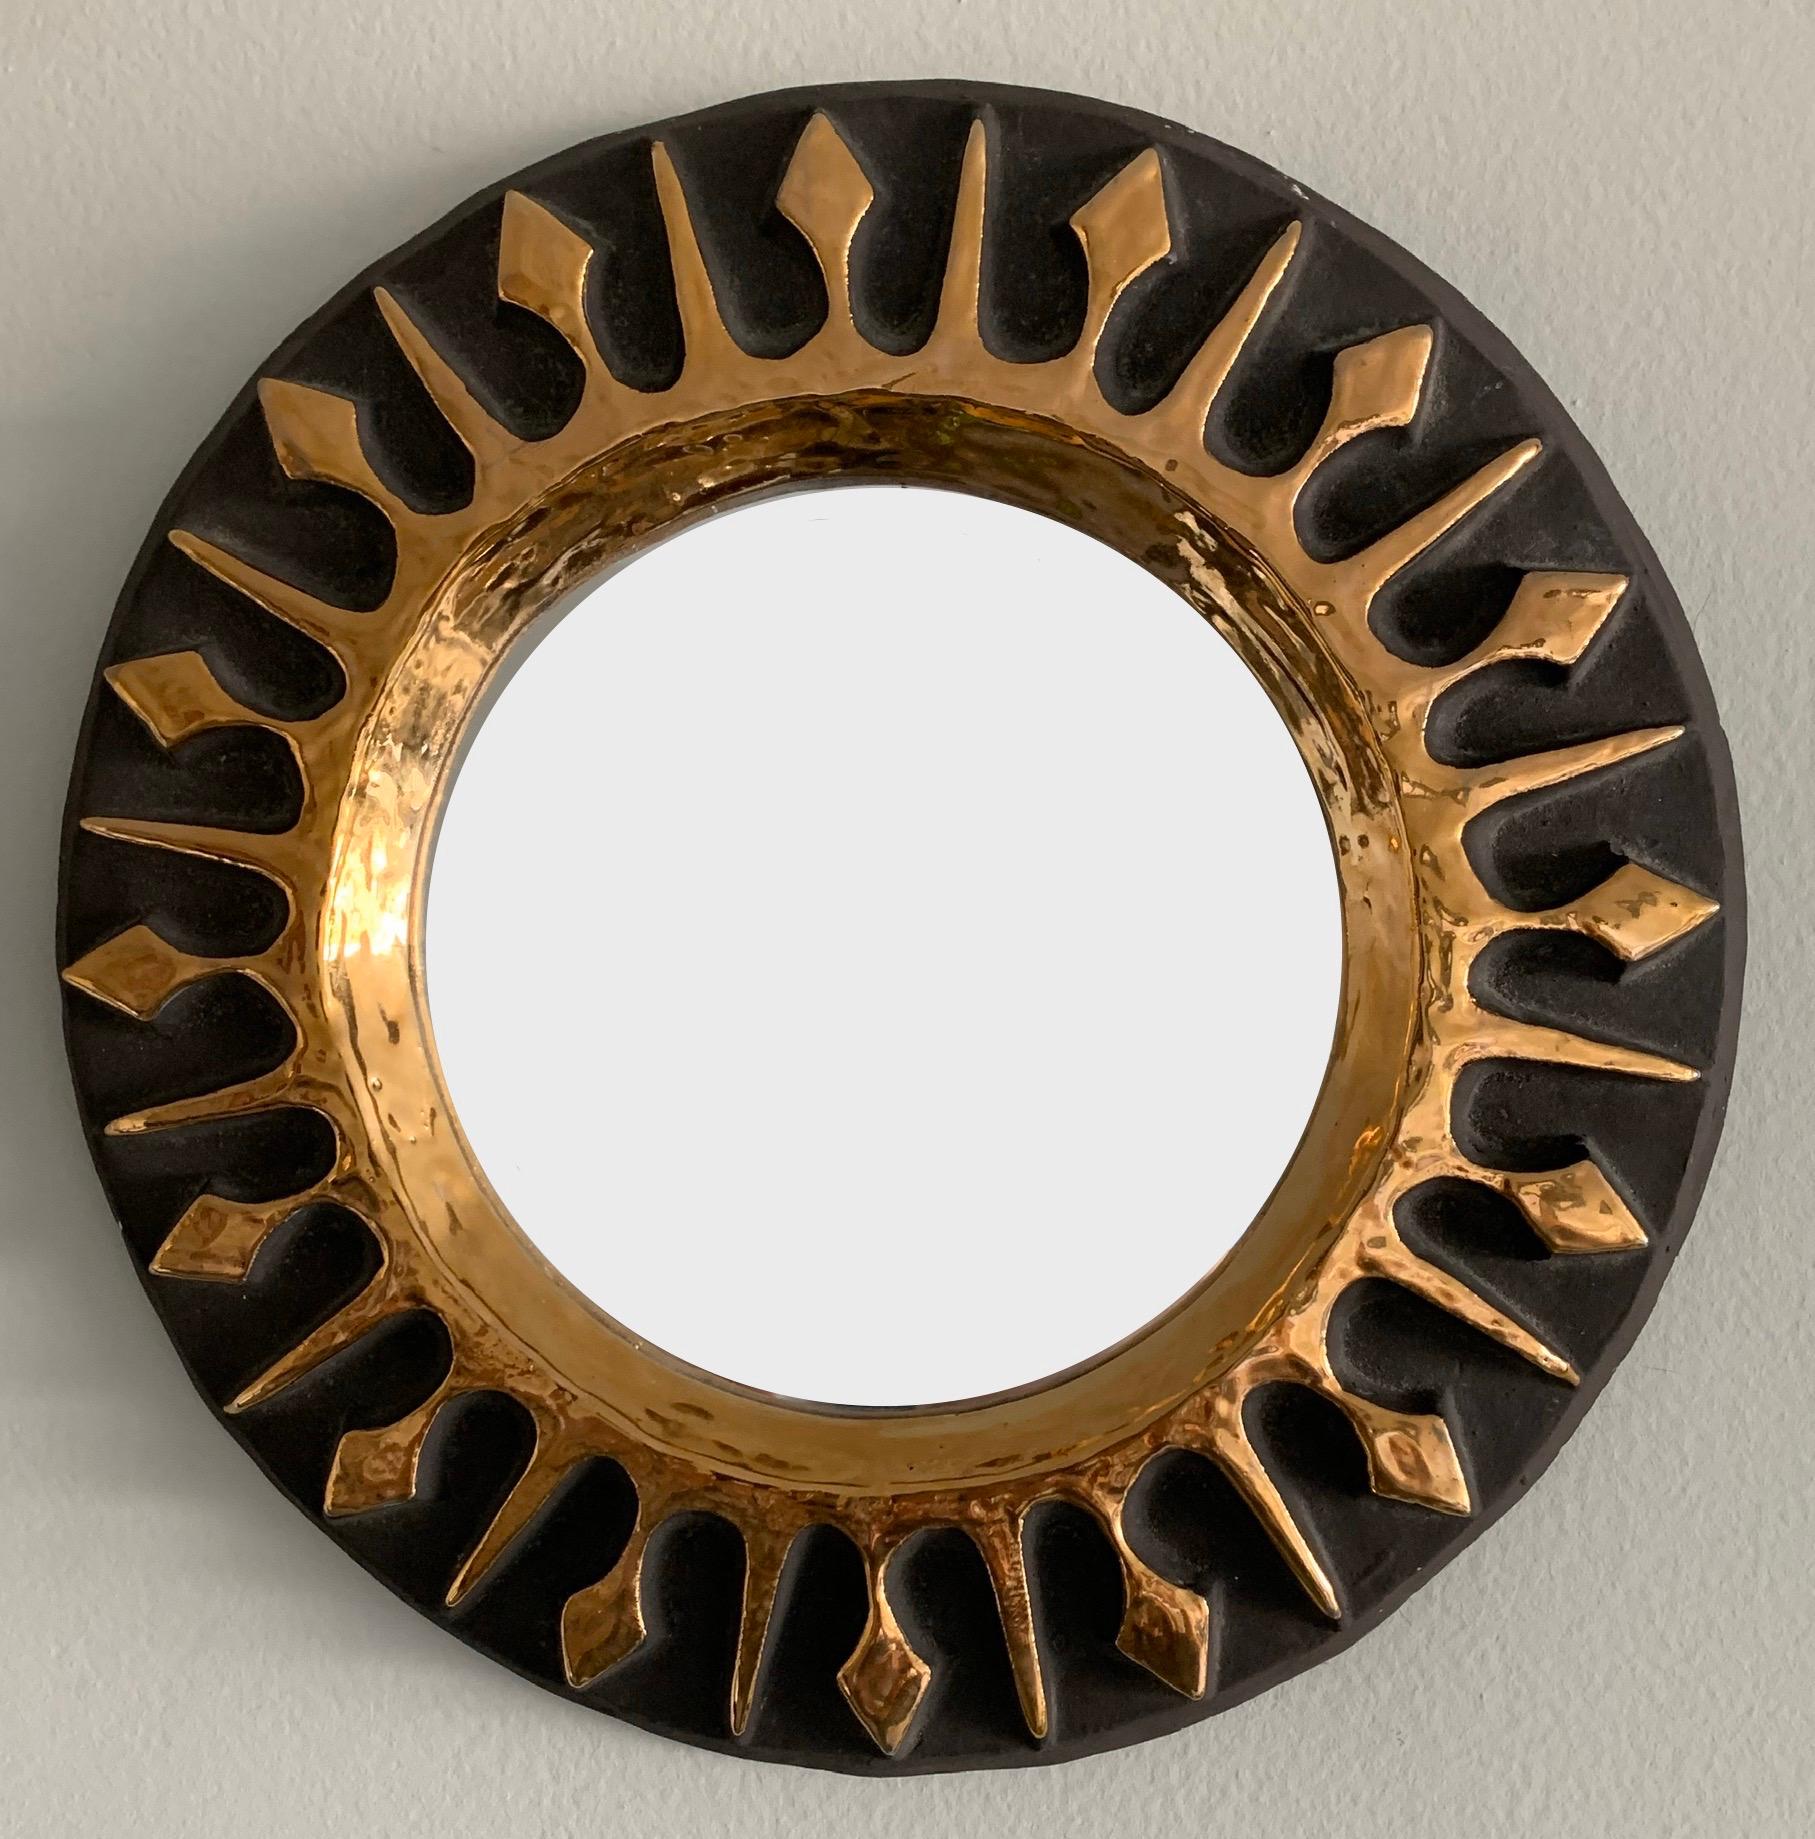 Midcentury French ceramic round mirror by Mithé Espelt. Dark brown glazed finish with hand painted gold gilt sunburst. Backed in green felt with center hook for hanging. Hanging hardware not included.